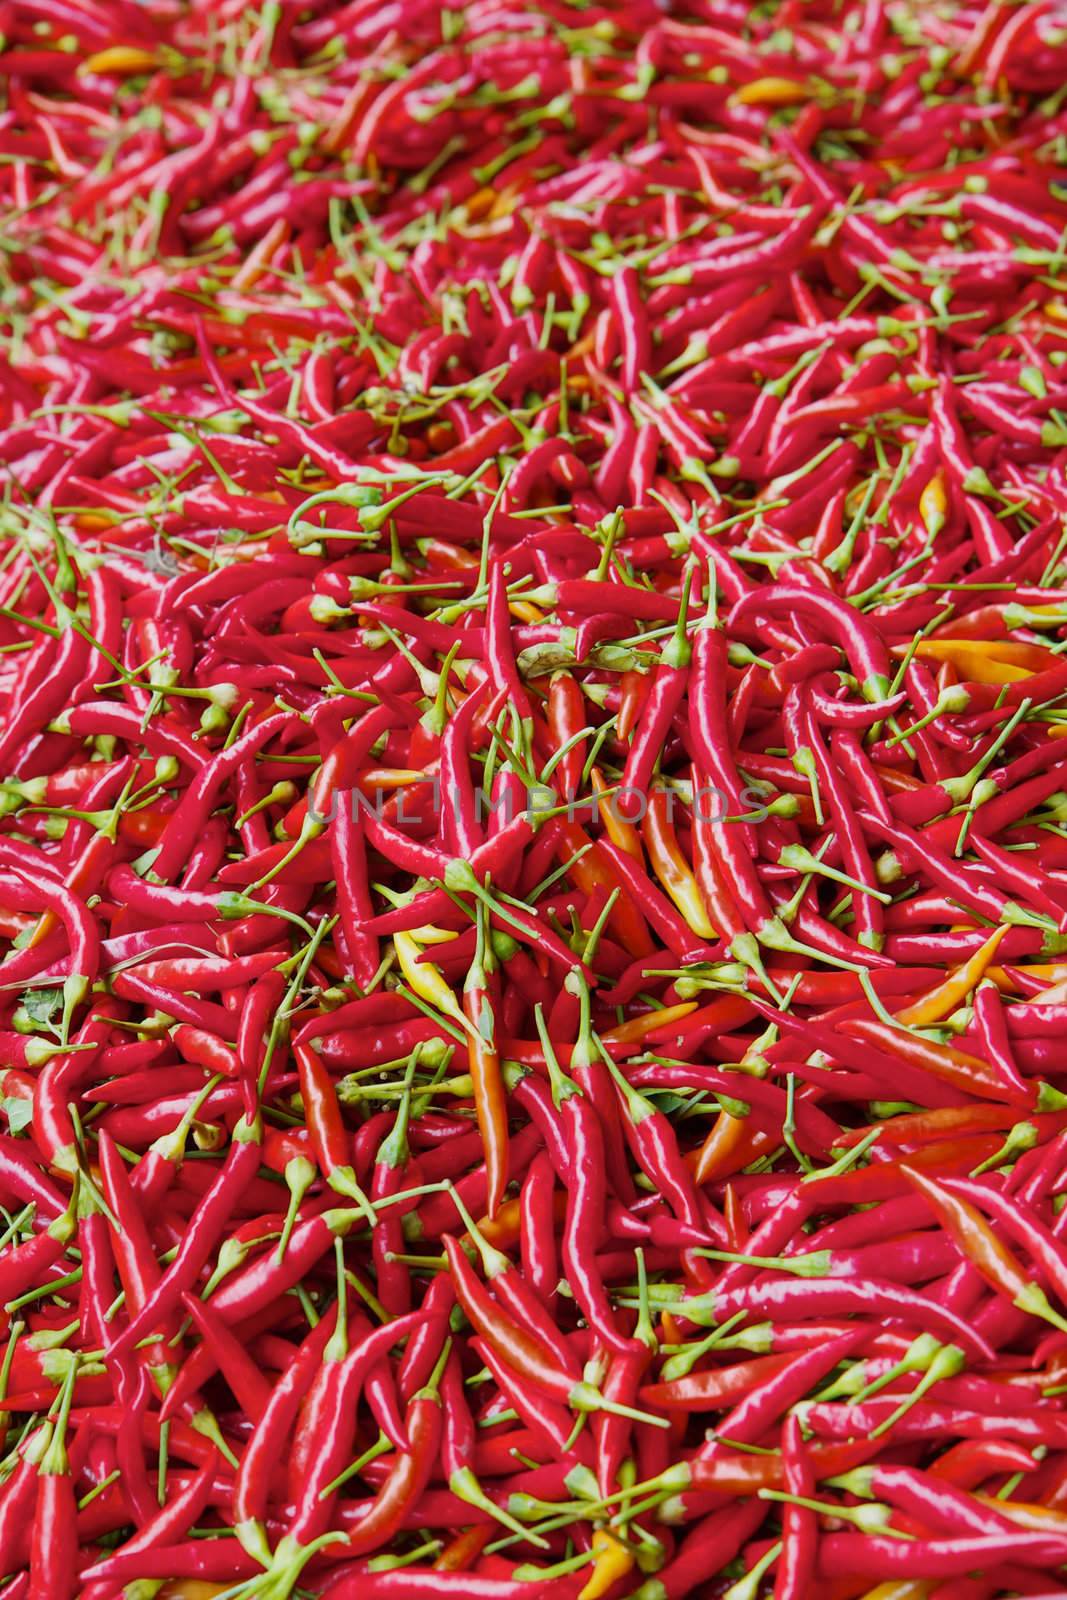 Thousands of Red hot chili peppers with green tops at the farmers market